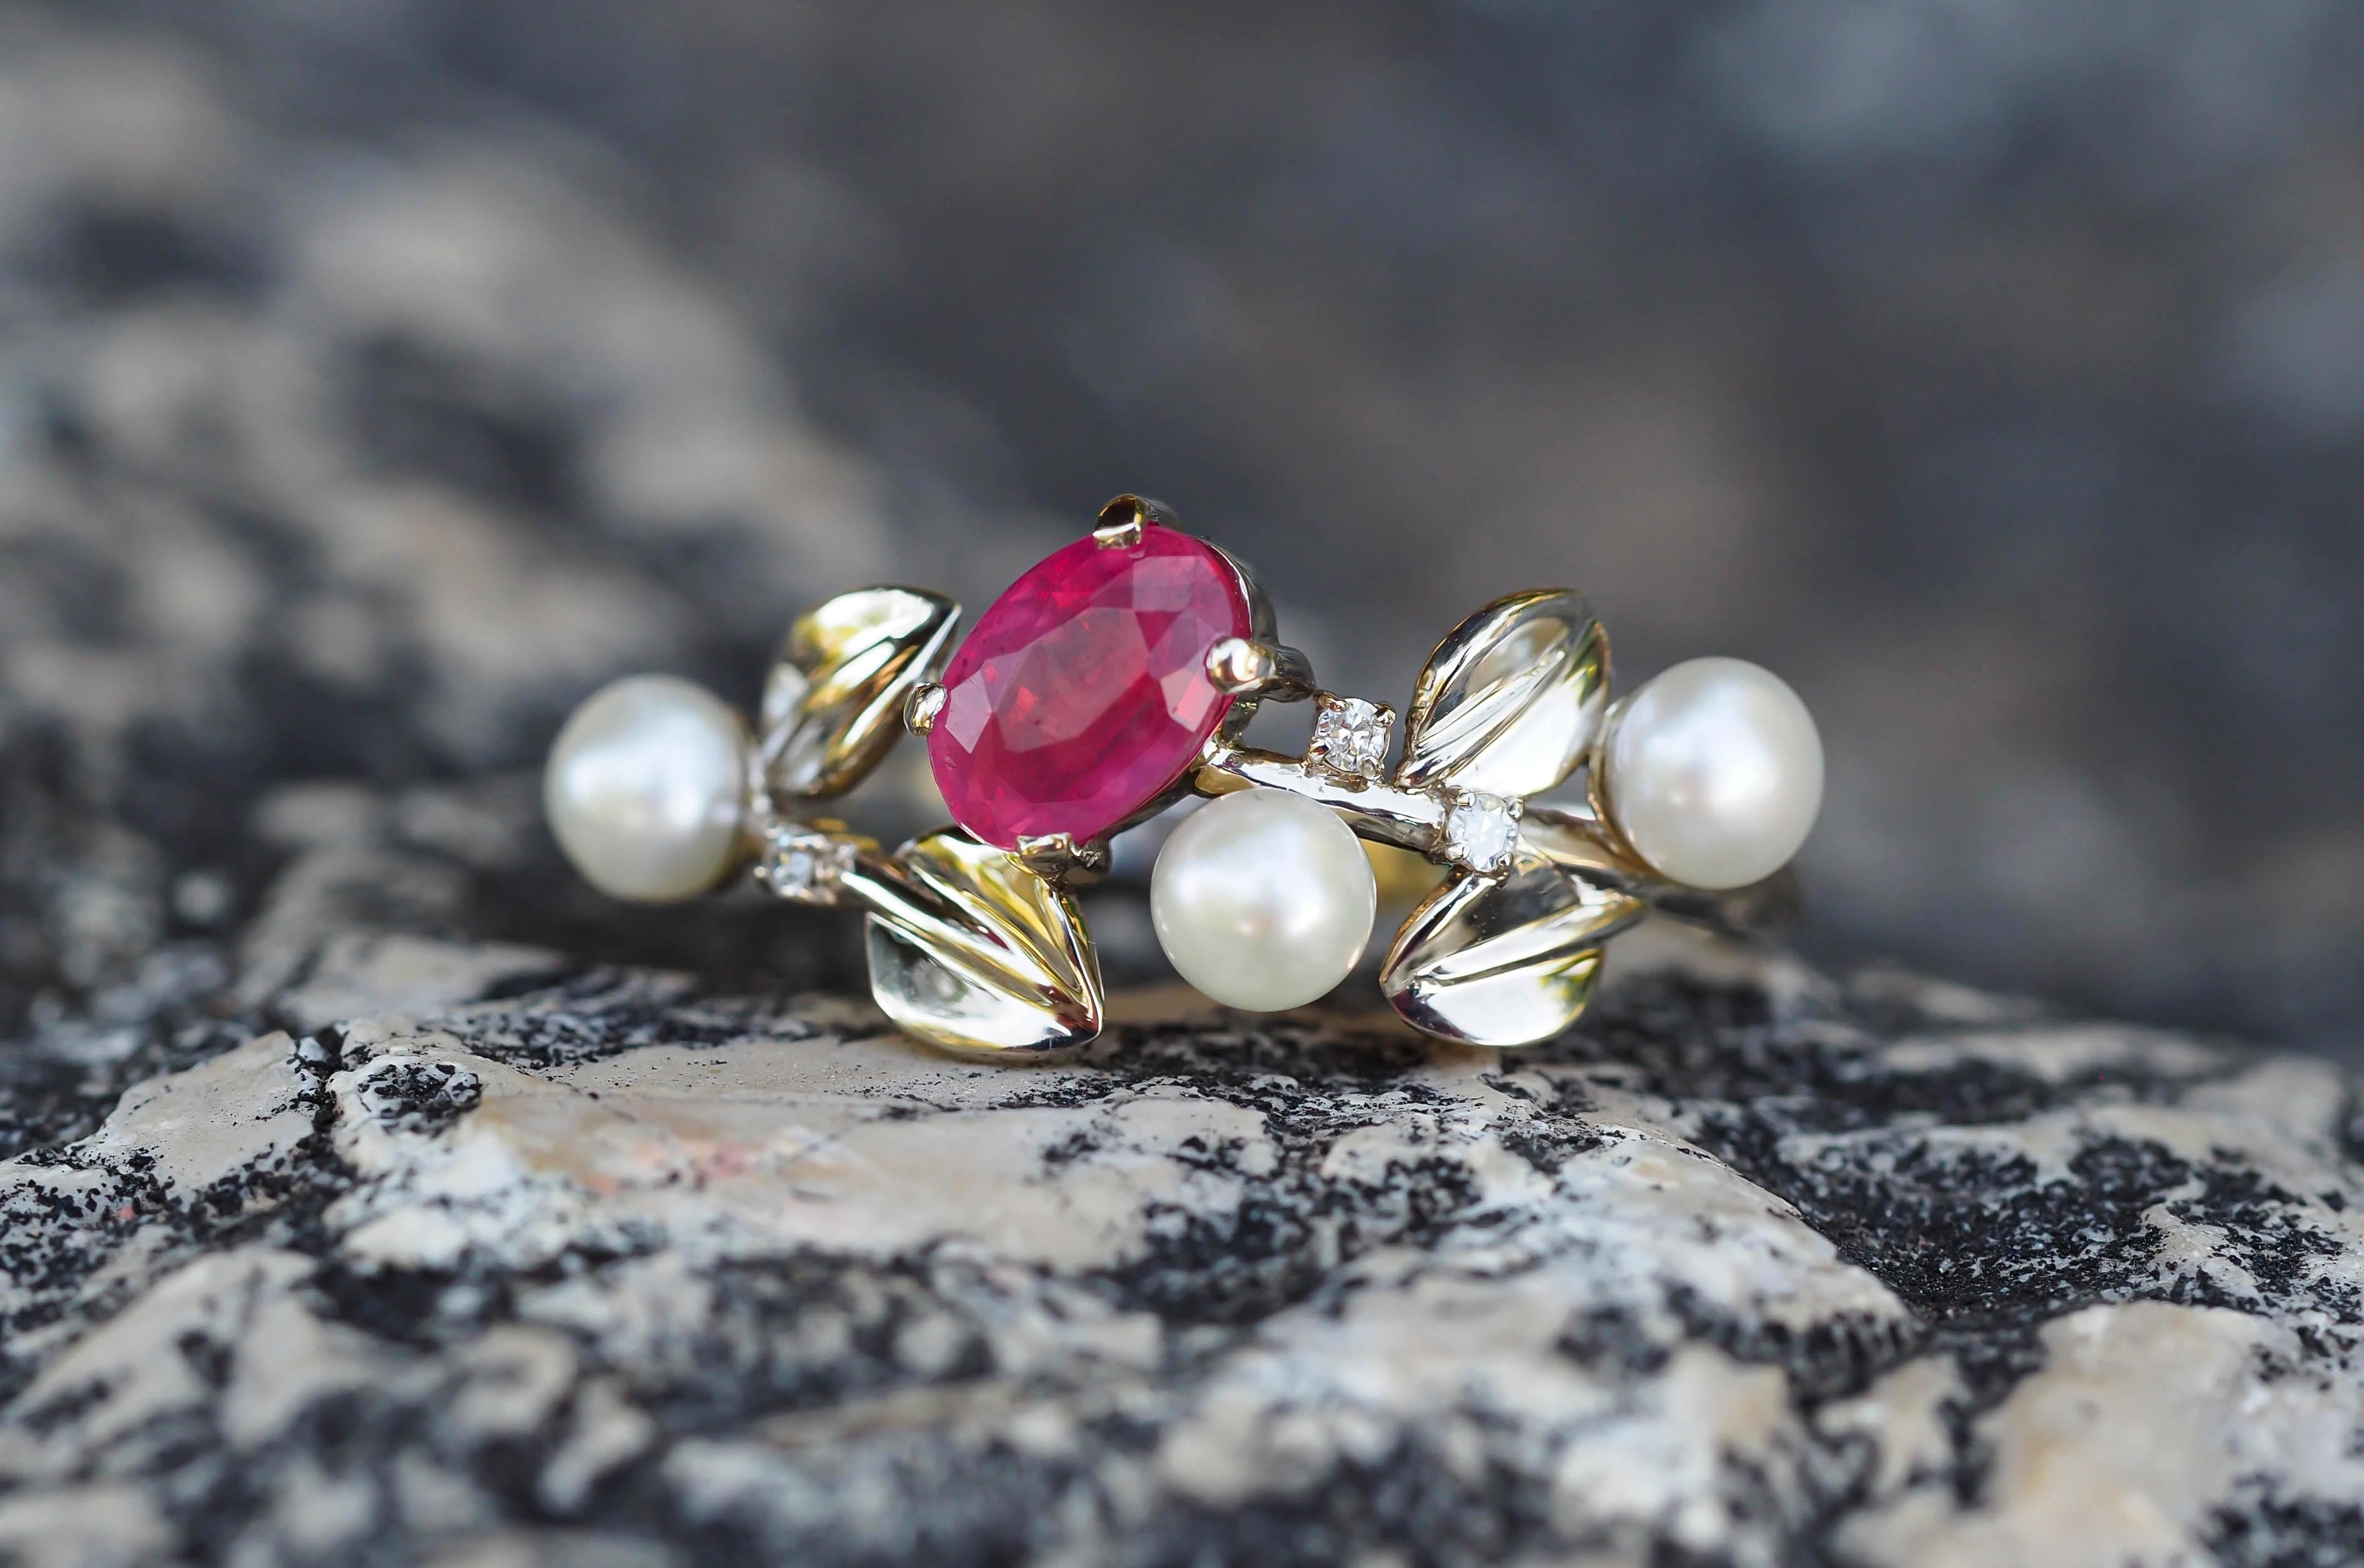 For Sale:  14k Gold Ring with Ruby, Pearls and Diamonds. July birthstone ruby ring 13